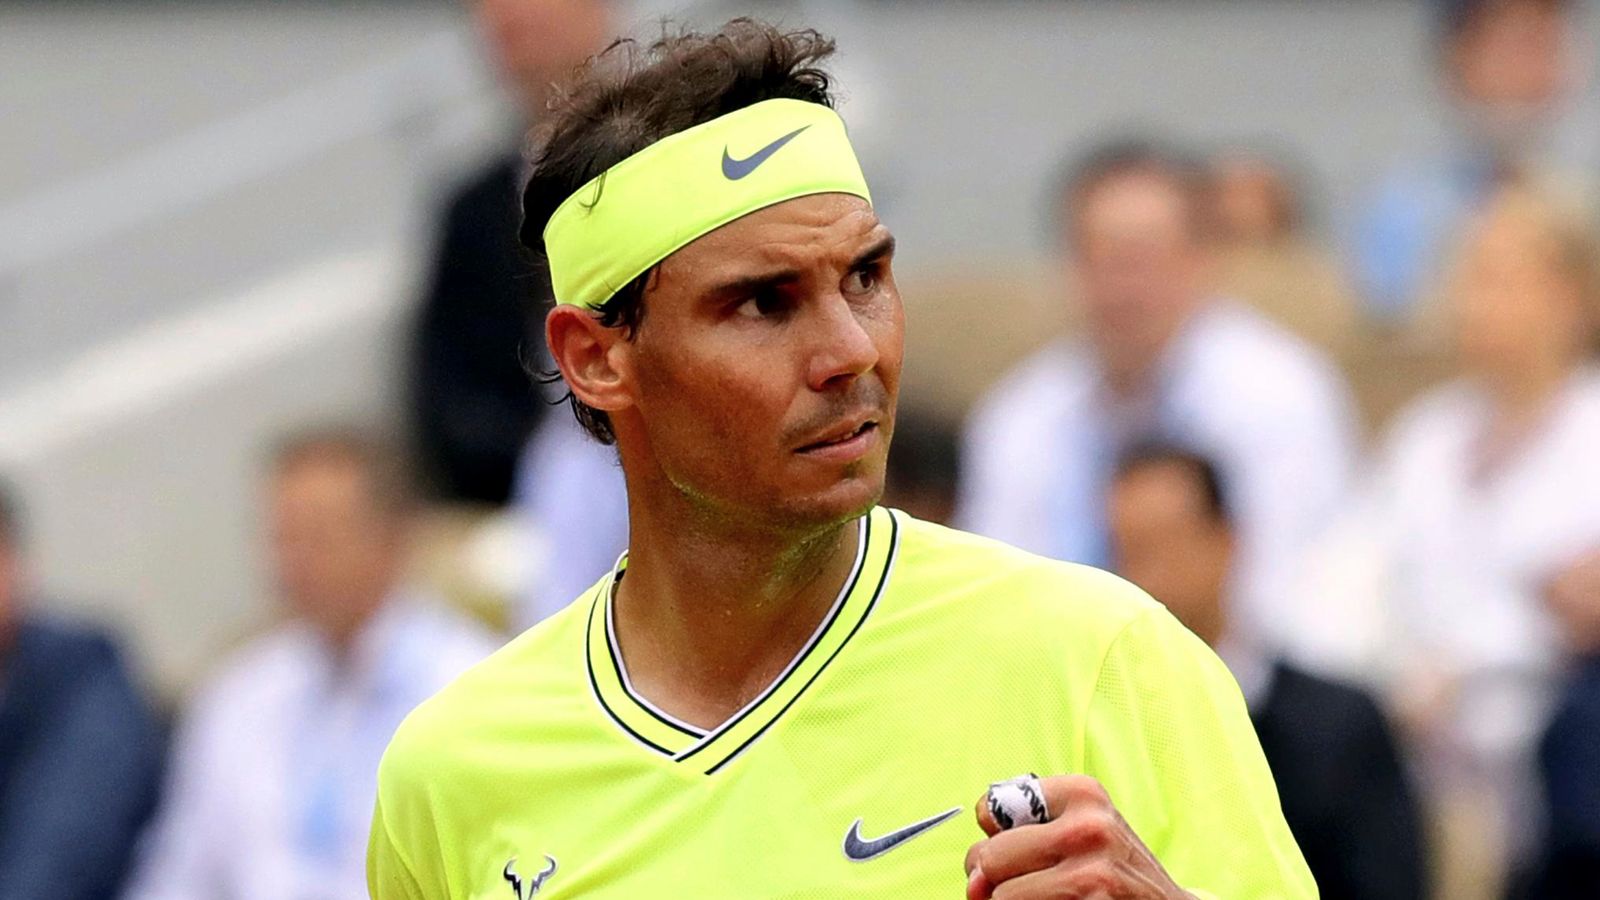 Rafael Nadal will return to tennis for first time in a year when he plays in Brisbane in January